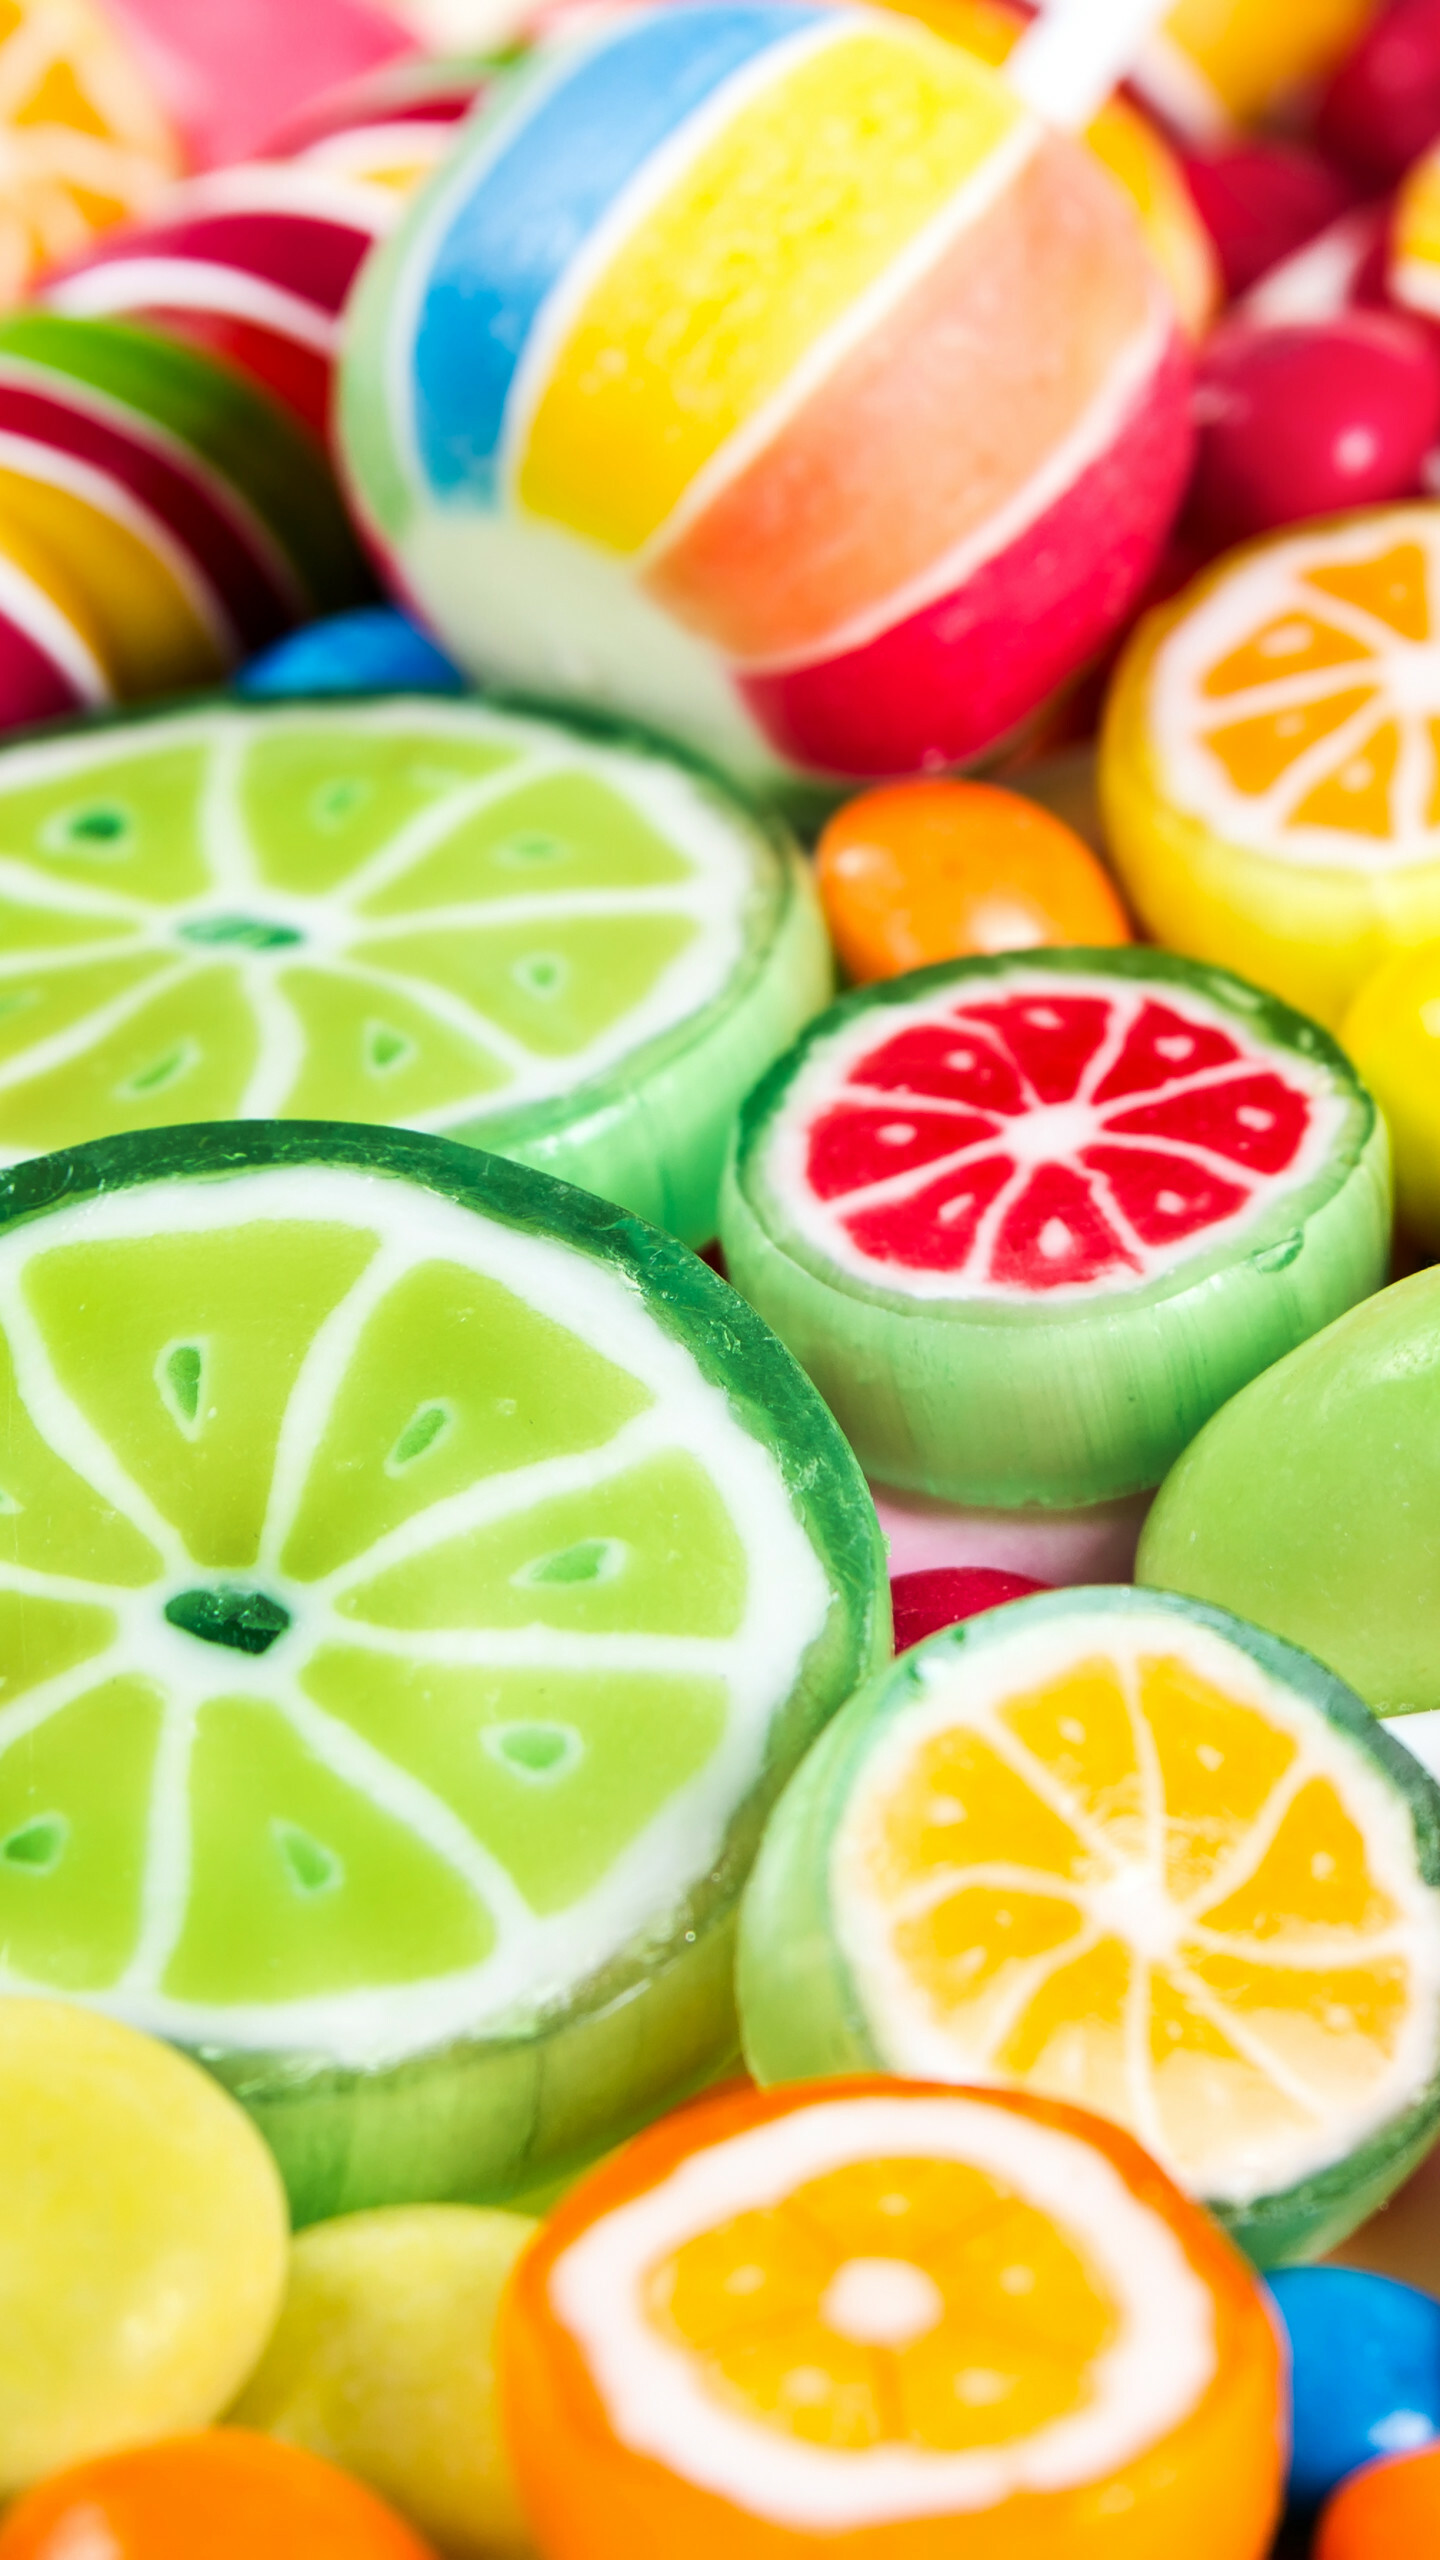 Sweets: Lemon slice candy, Featuring fruity flavor. 1440x2560 HD Wallpaper.